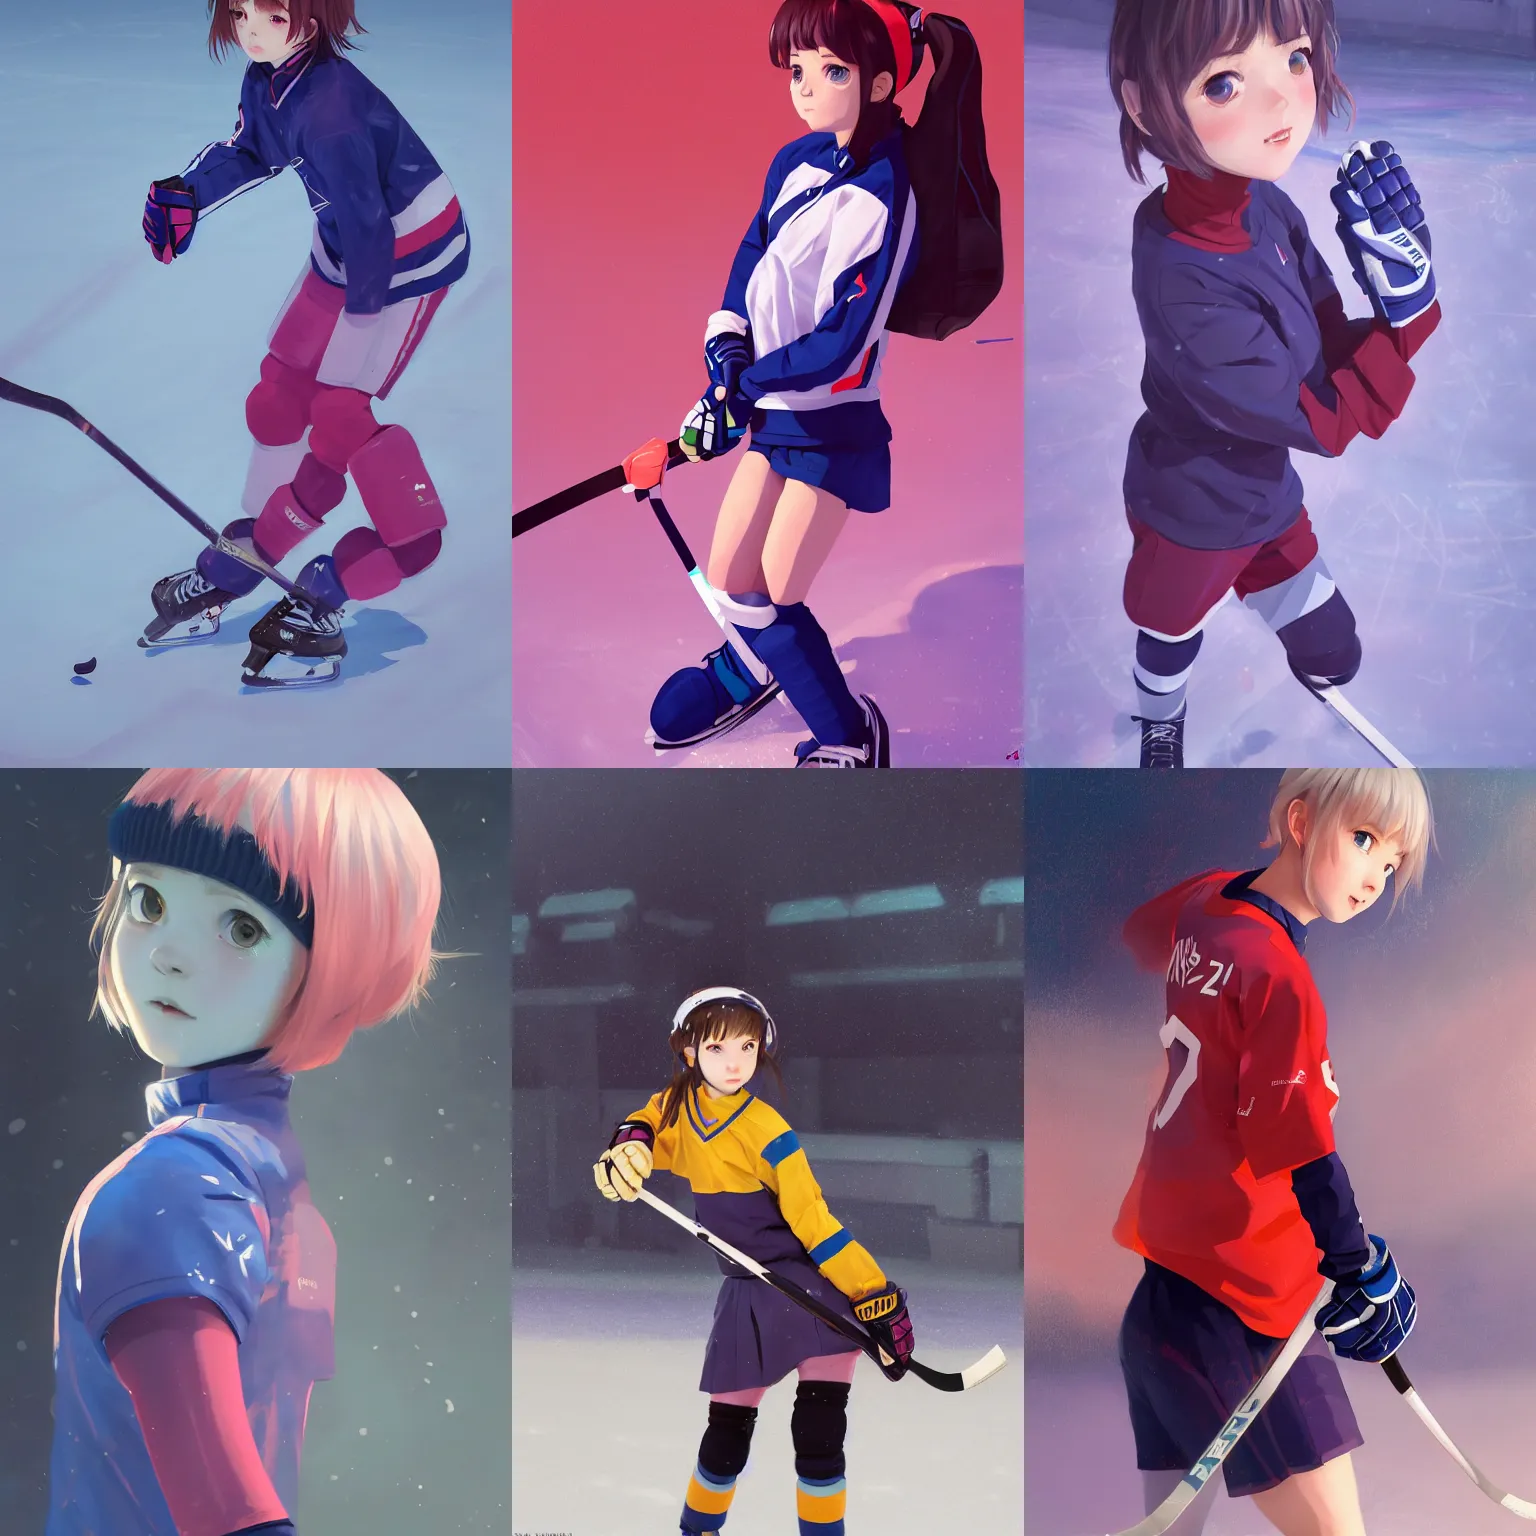 Don't mind me just say dreaming about a hockey anime. 😵‍💫 : r/nhl